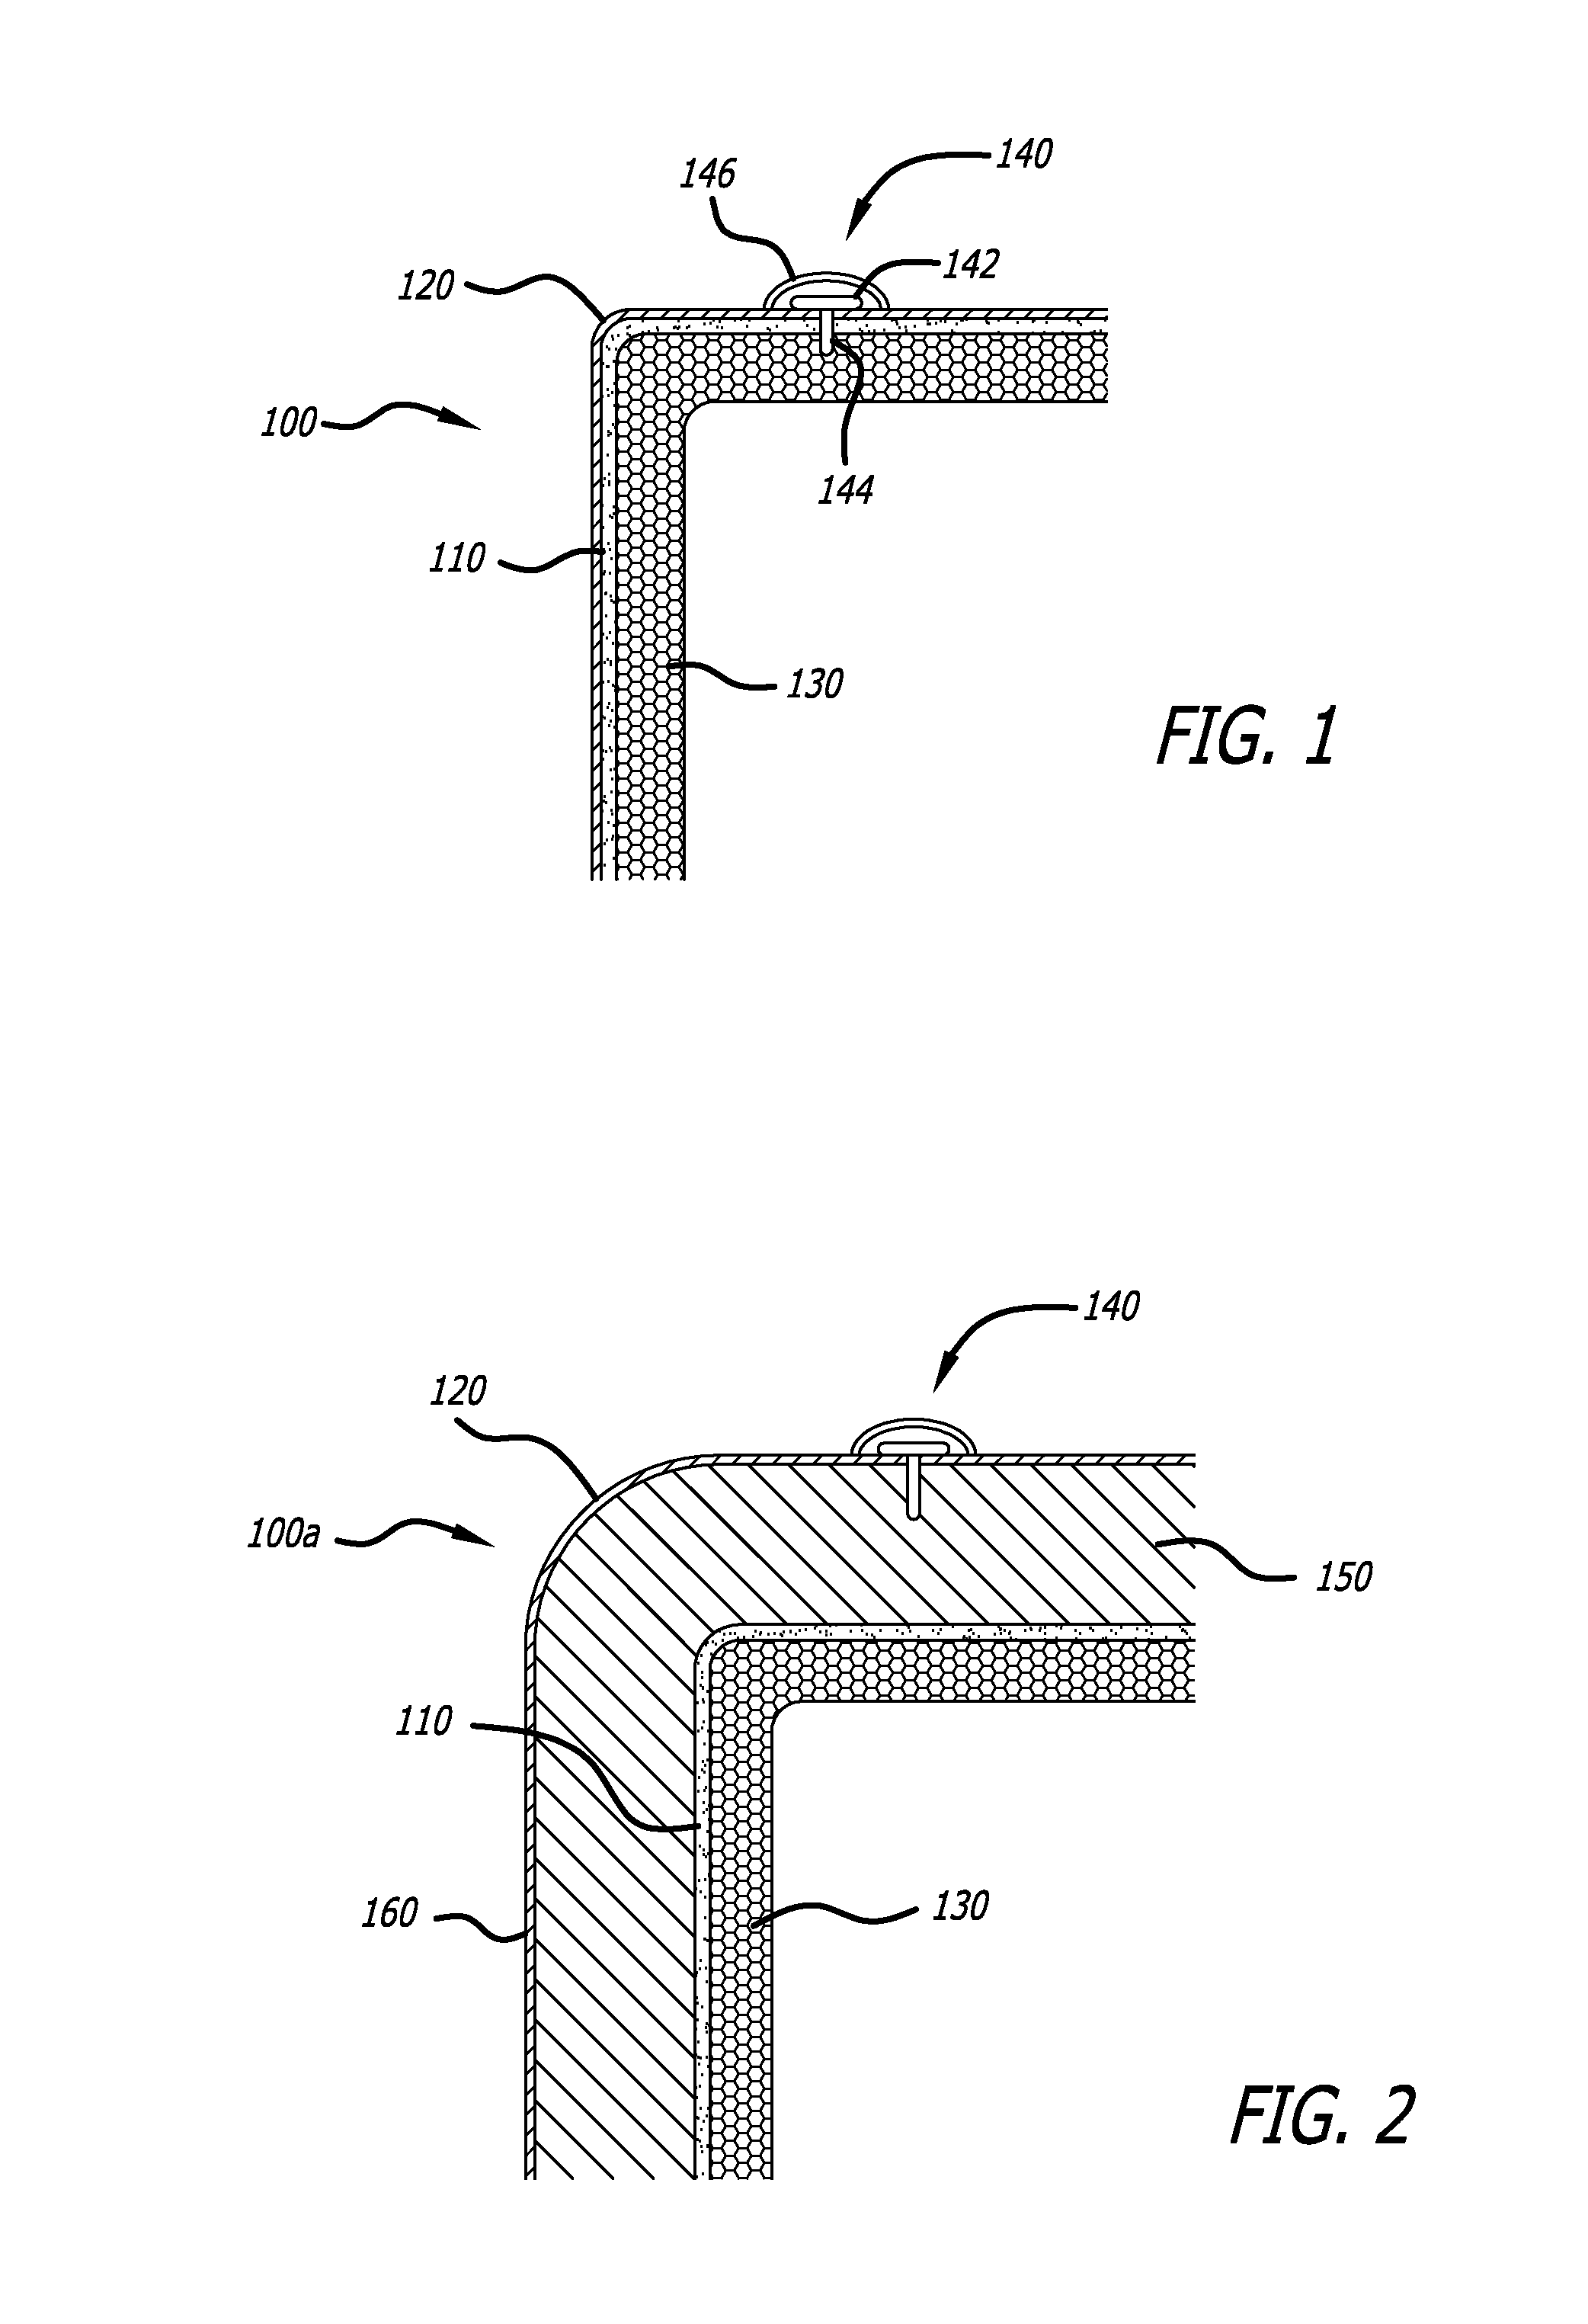 Aircraft monument with improved thermal insulation and acoustic absorption